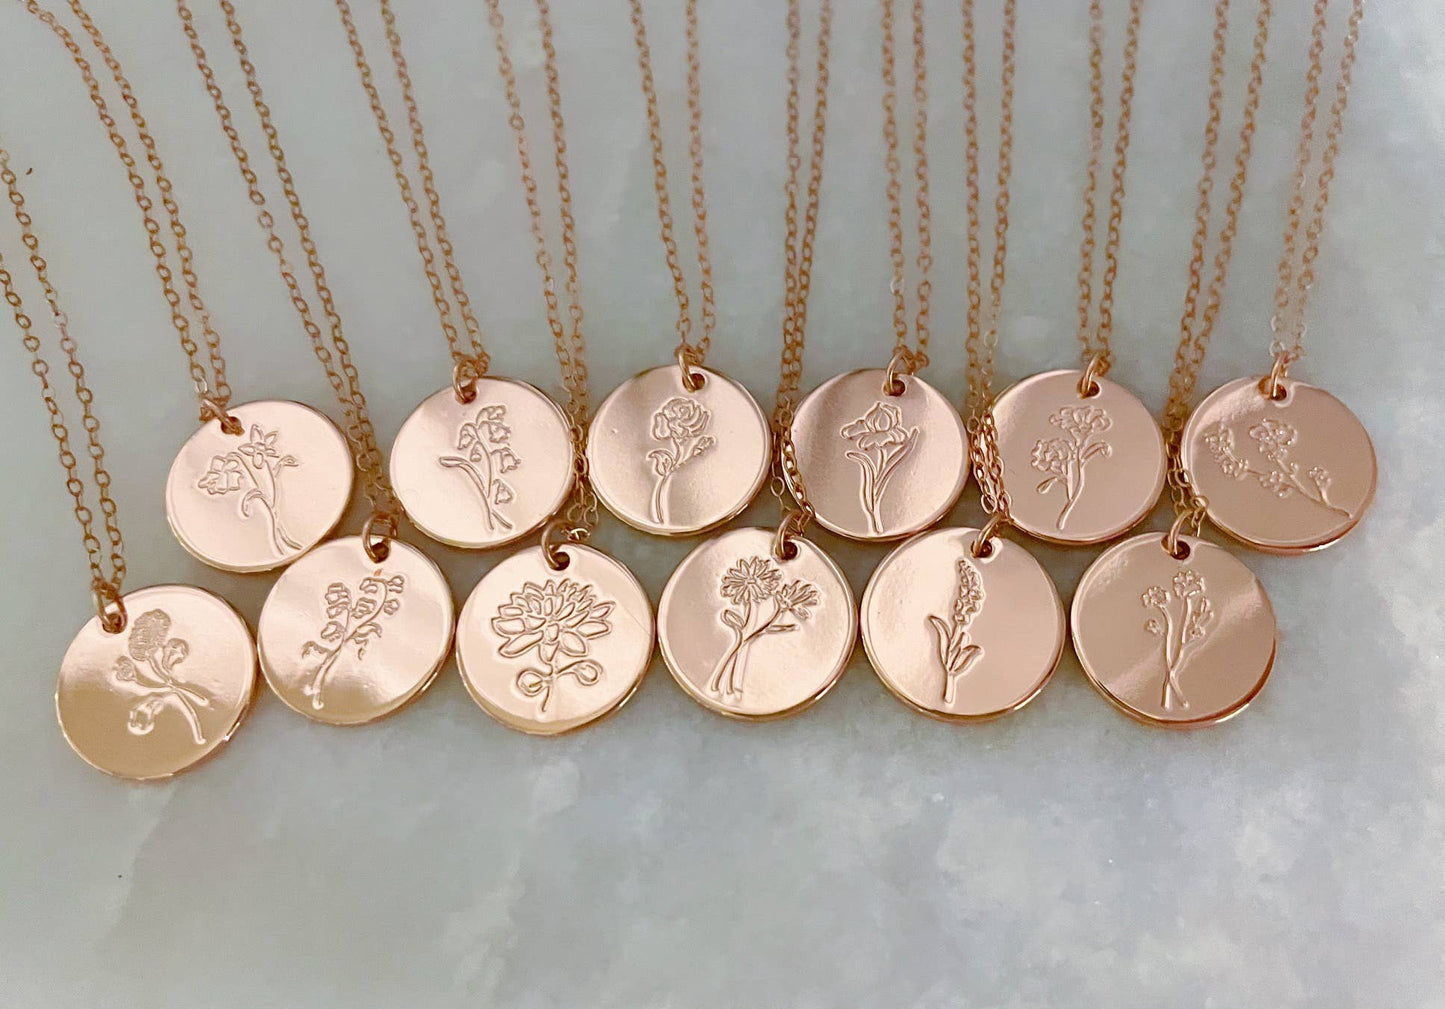 Rose Gold Birth Flower Necklace, Mothers Day Jewelry Gift: June-rose Spring-Summer Laalee Jewelry